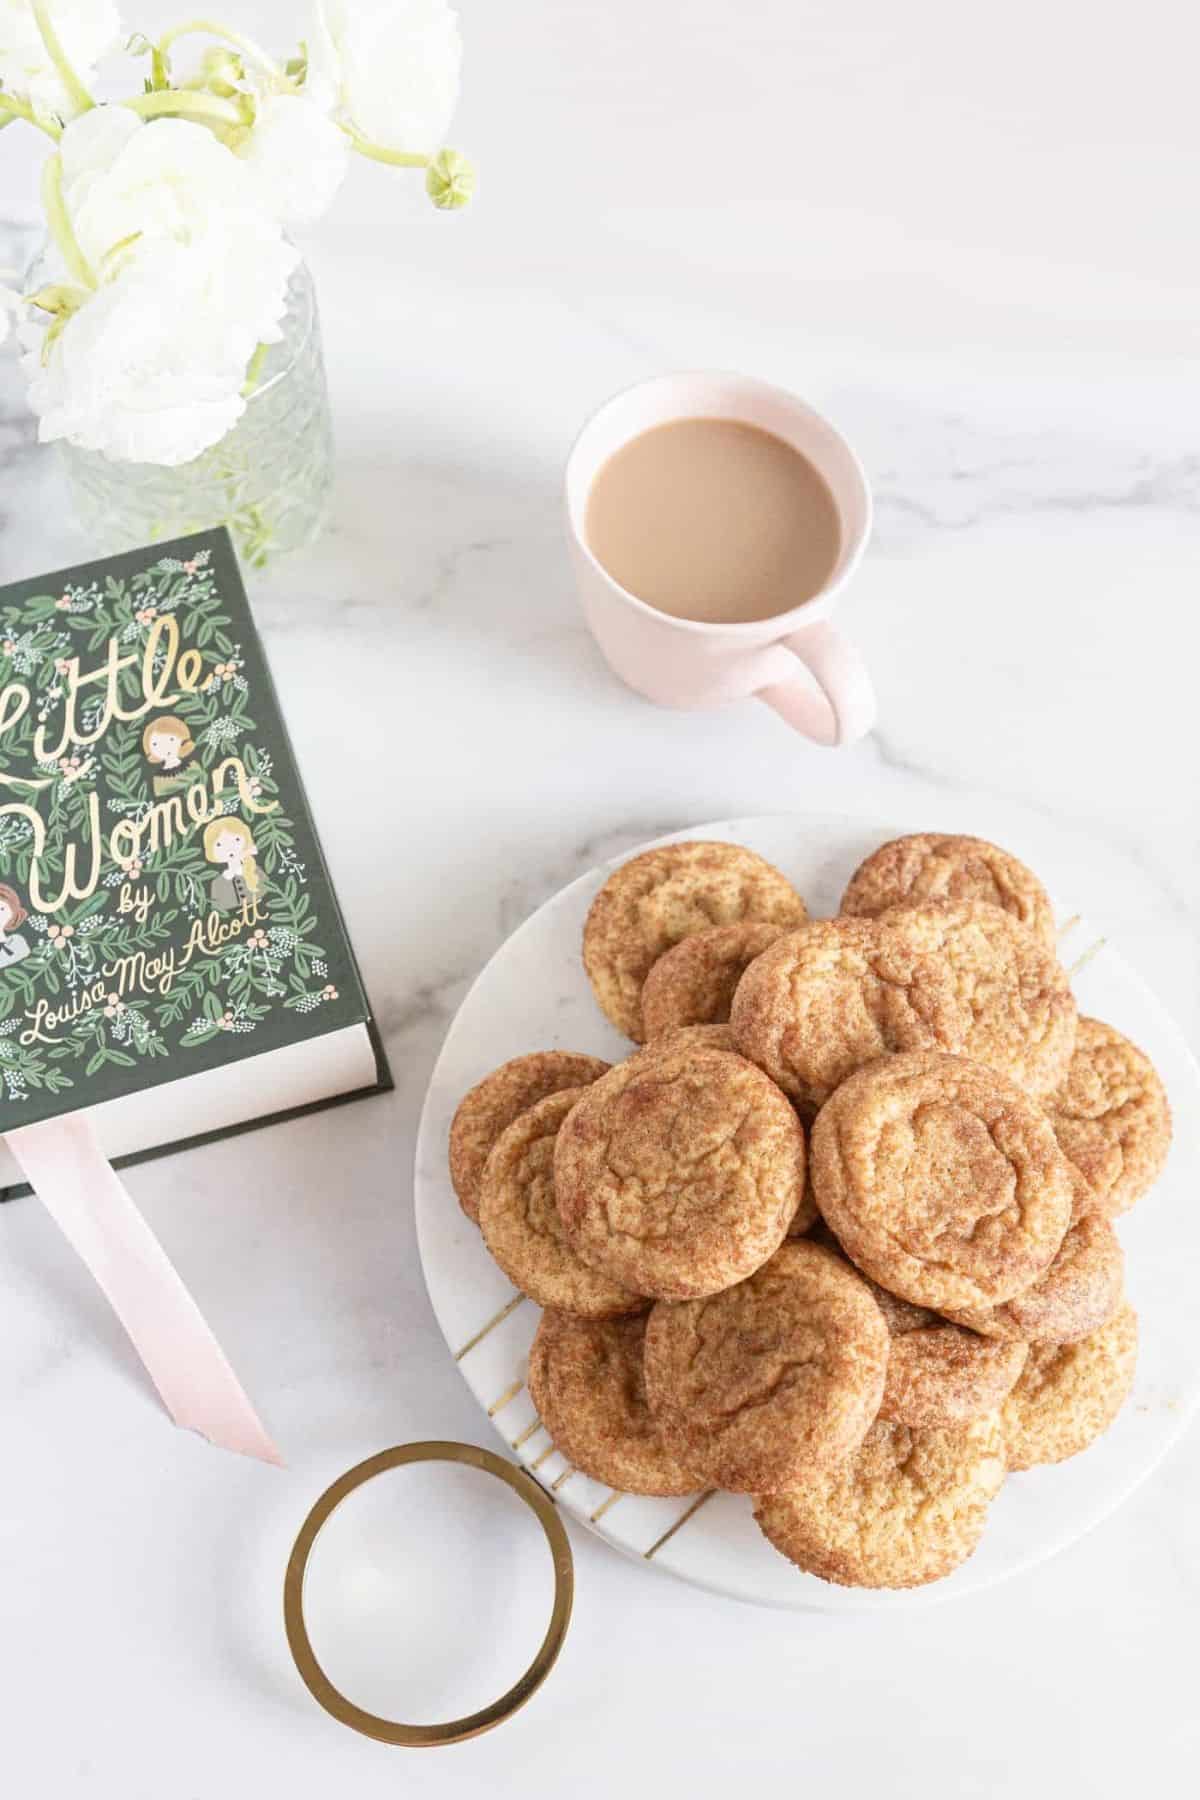 snickerdoodles and book